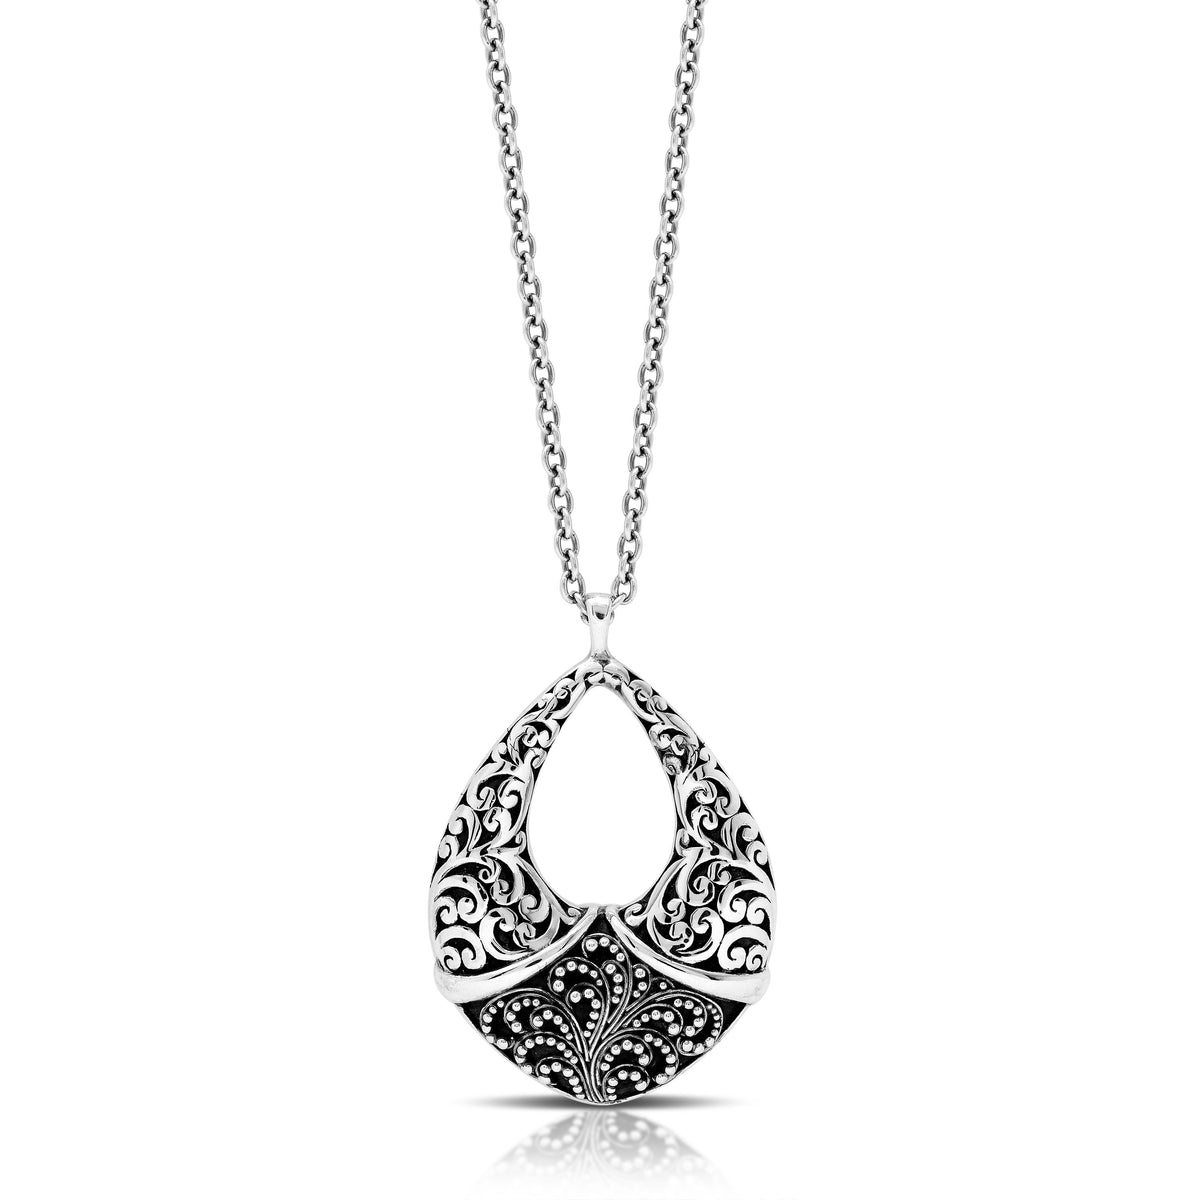 Classic Granulated Open Signature Scroll Pendant Necklace. Pendant 37mm X 47mm 18" chain